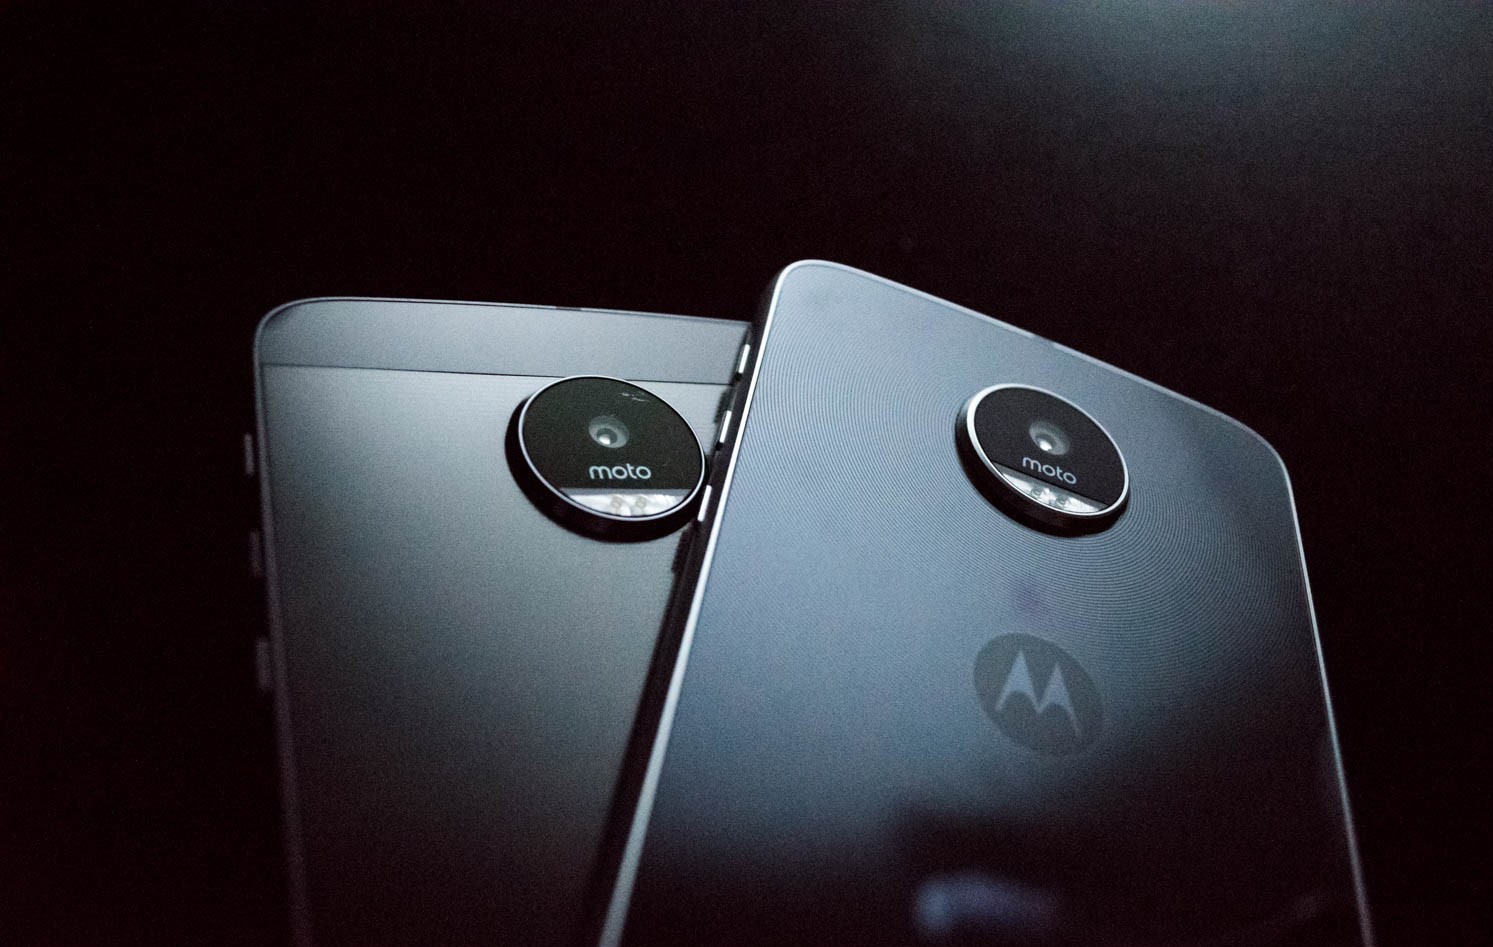 moto-z-phones-what-you-need-to-know